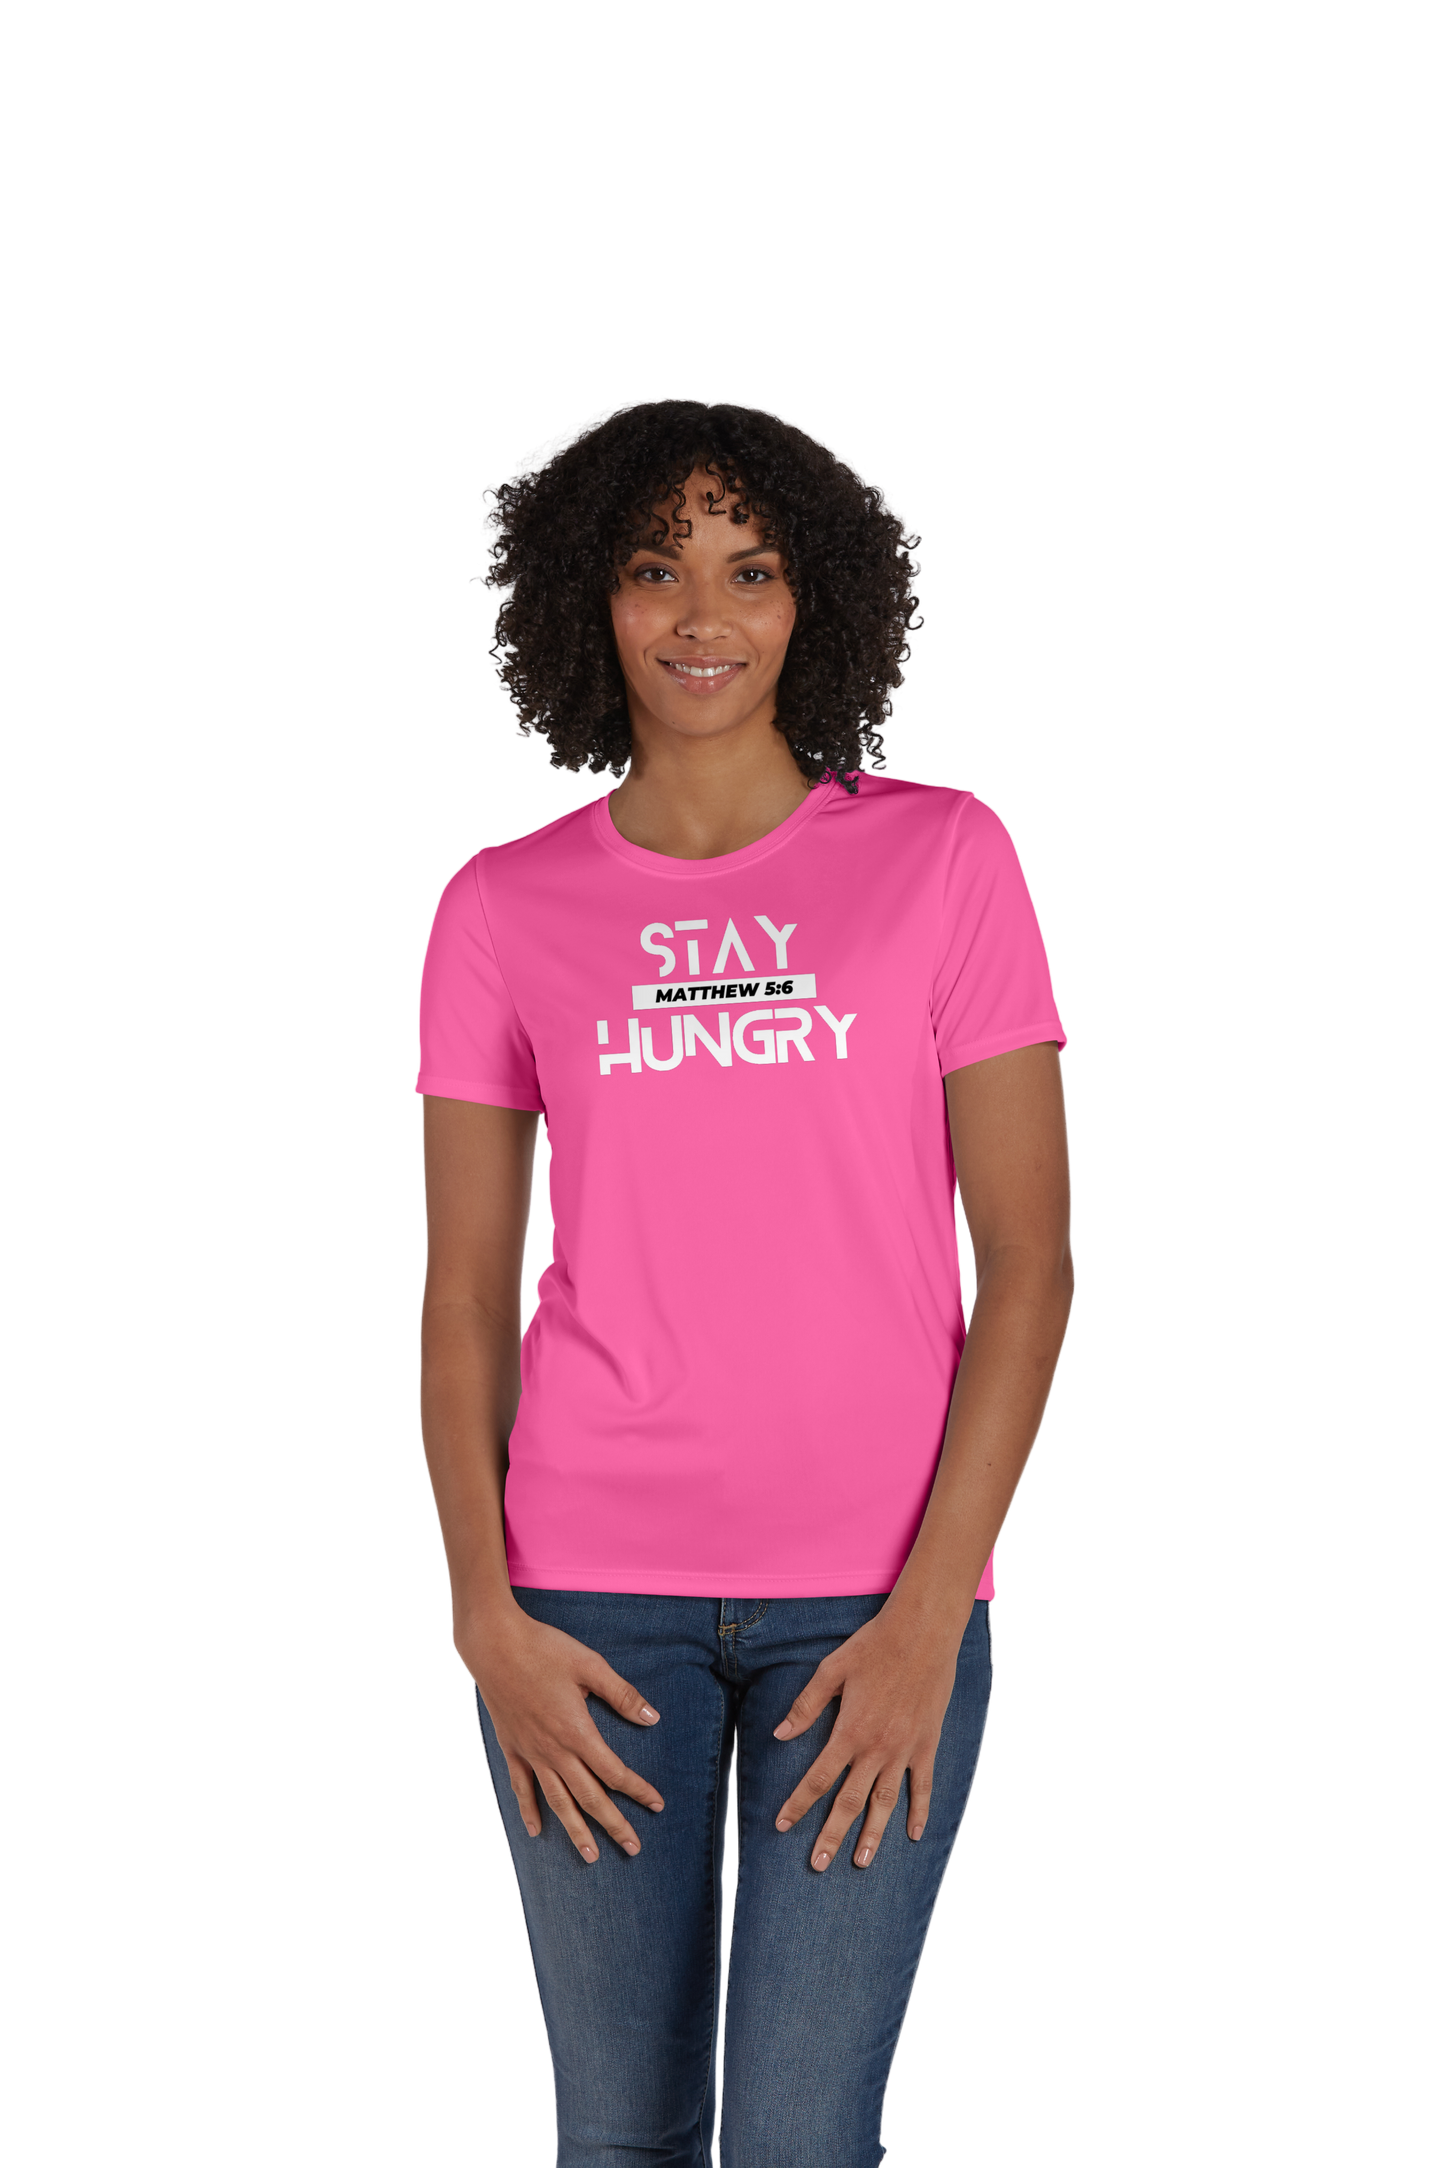 Stay Hungry Women's Dri-fit